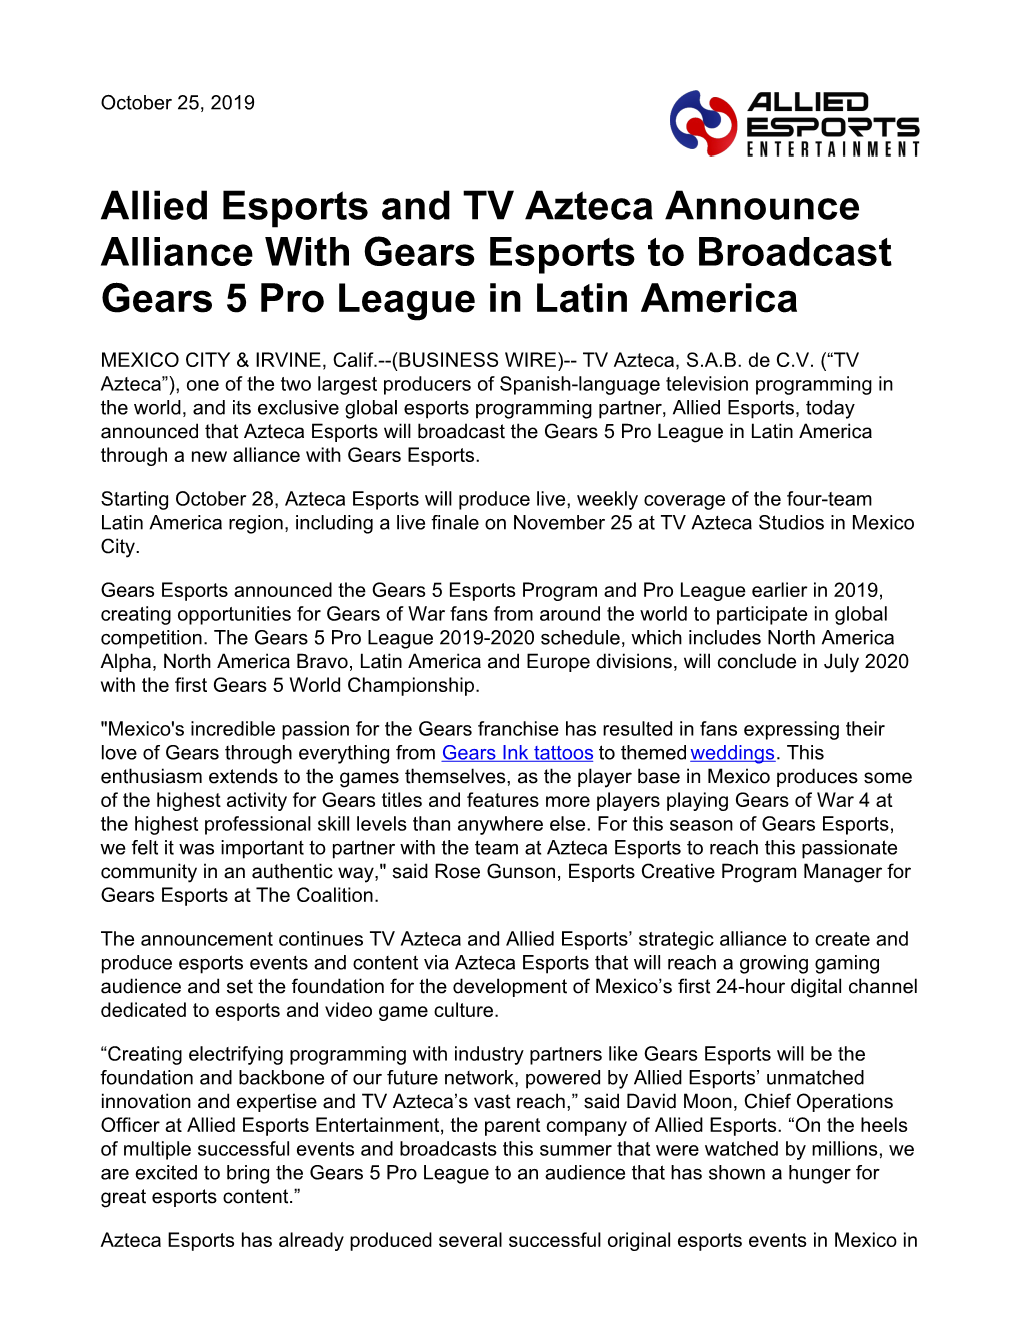 Allied Esports and TV Azteca Announce Alliance with Gears Esports to Broadcast Gears 5 Pro League in Latin America